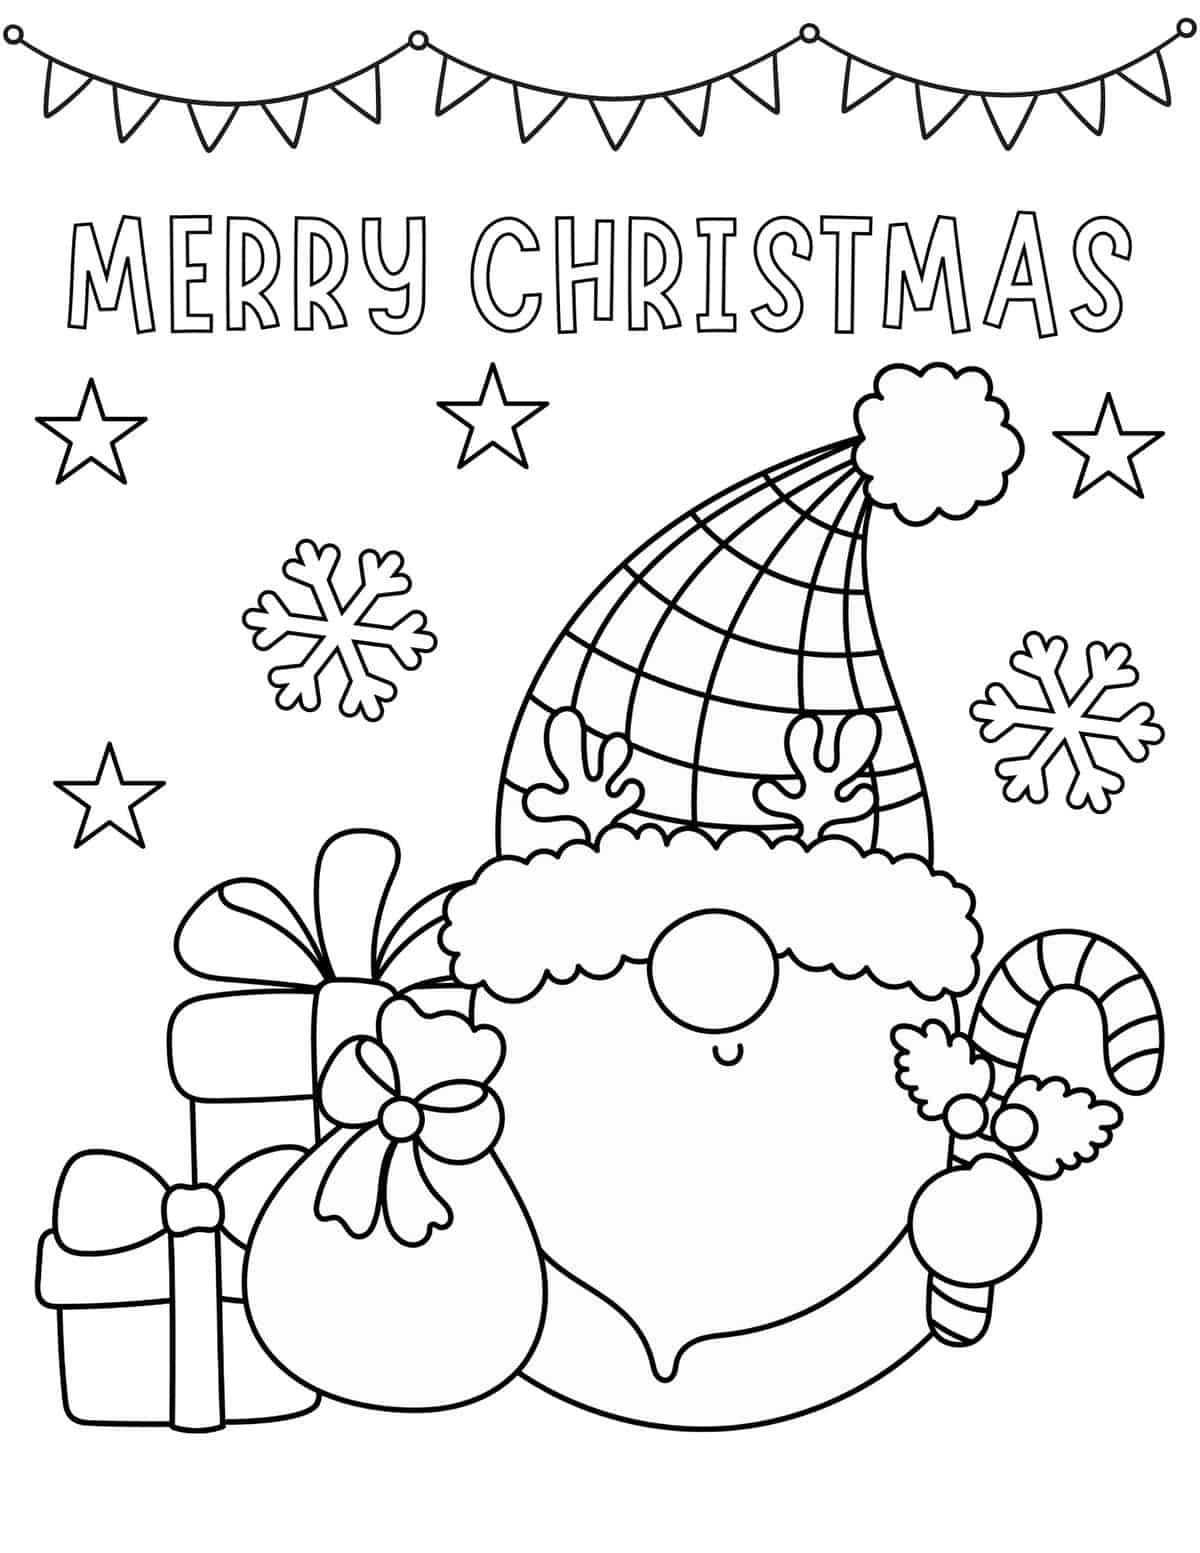 Printable Christmas Coloring Pages Free_25163